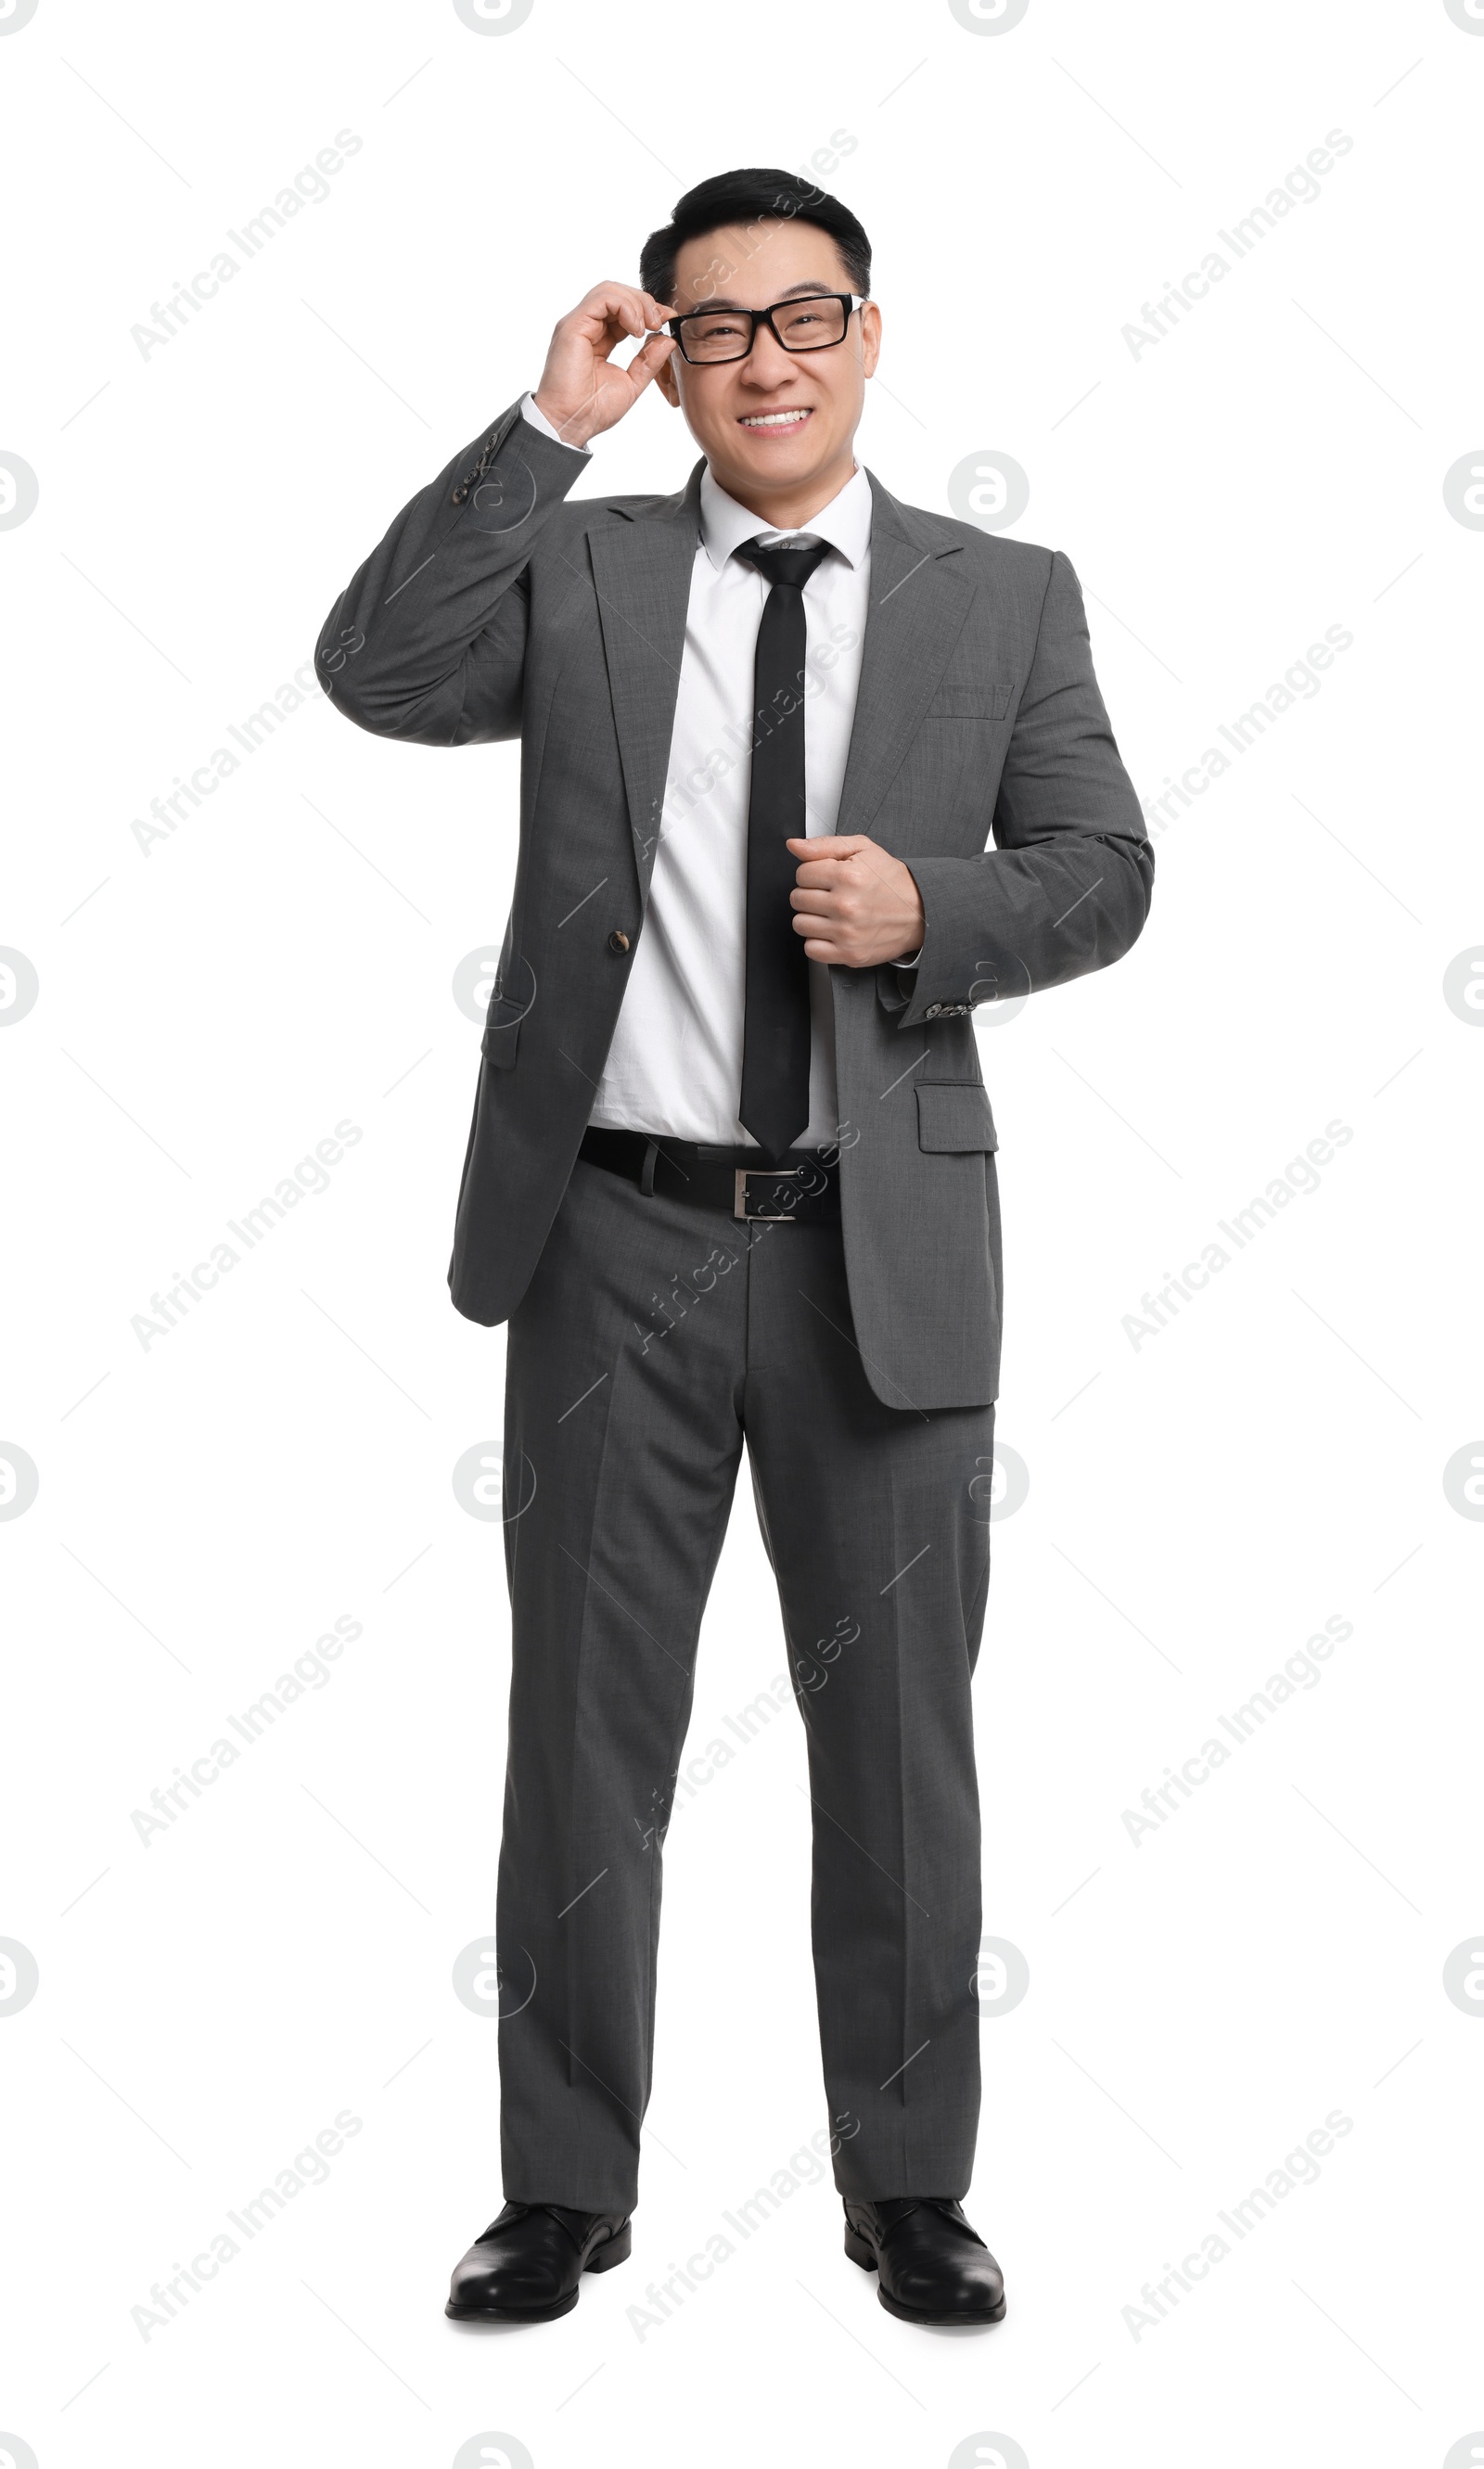 Photo of Businessman in suit wearing glasses on white background